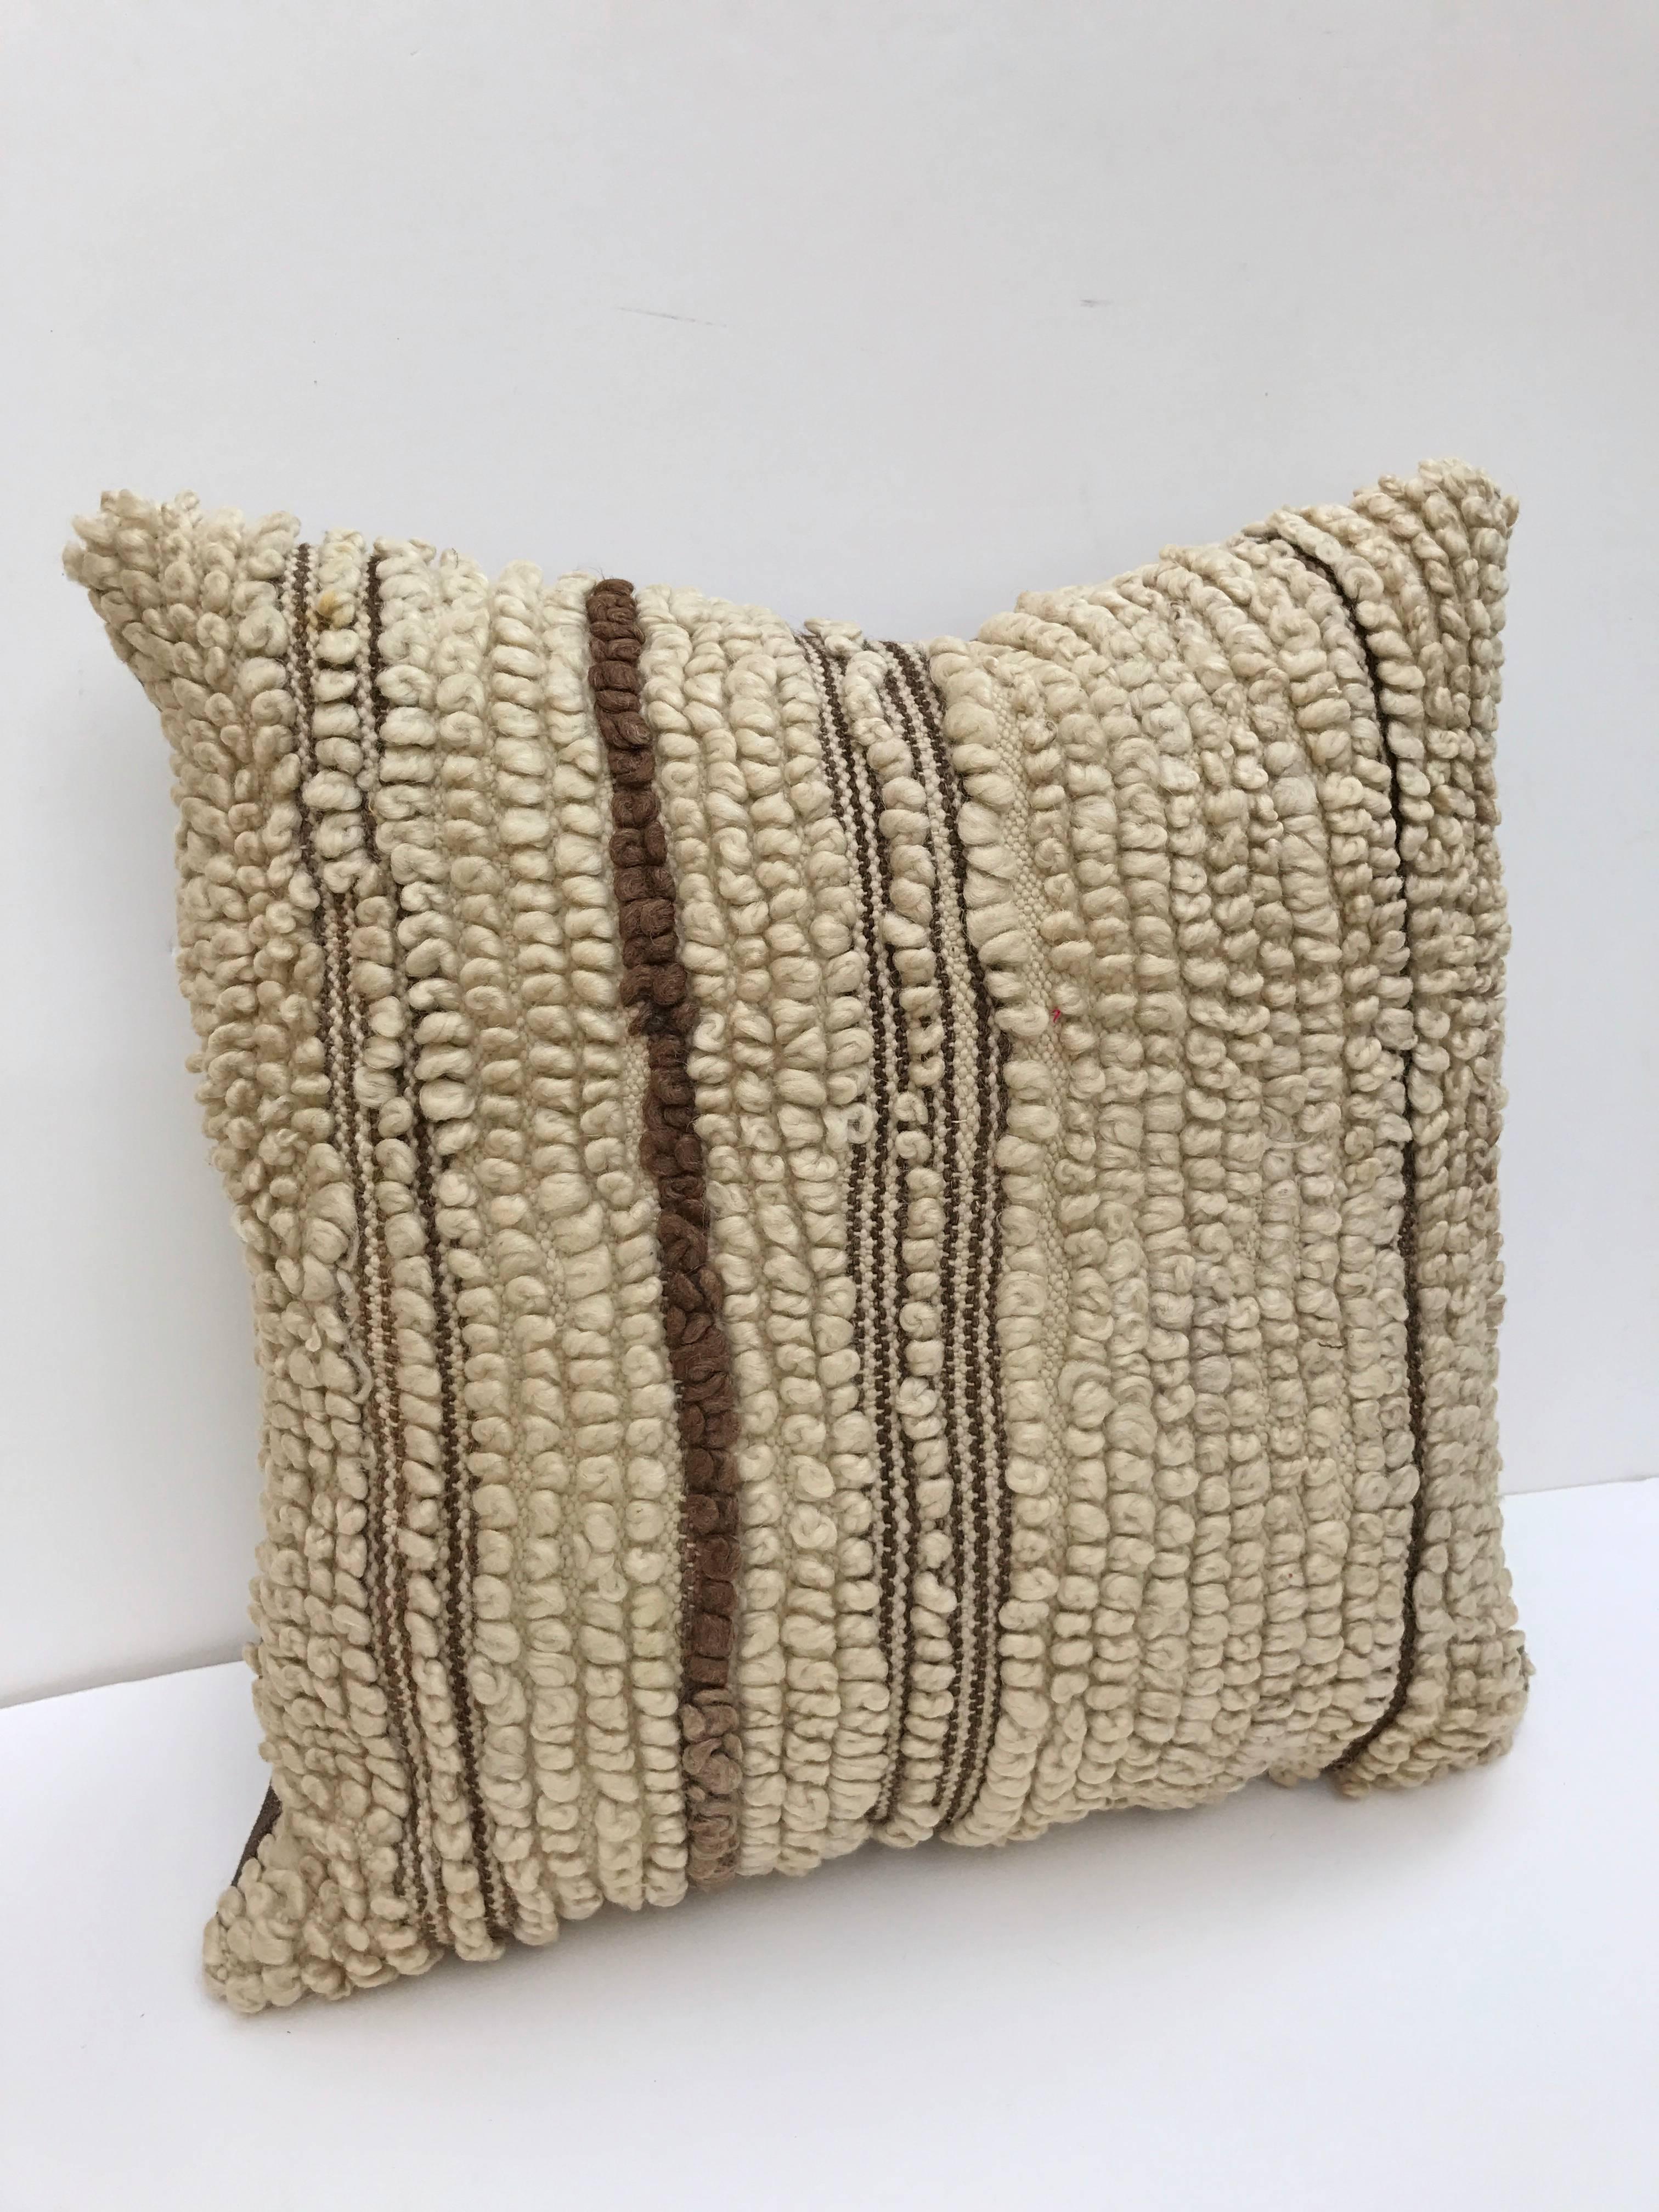 Custom pillow cut from a vintage hand loomed wool Moroccan Beni Ouarain rug from the Atlas Mountains. Wool is soft and lustrous with natural colors. Pillow is backed in linen, filled with an insert of 50/50 down and feathers and hand-sewn closed.